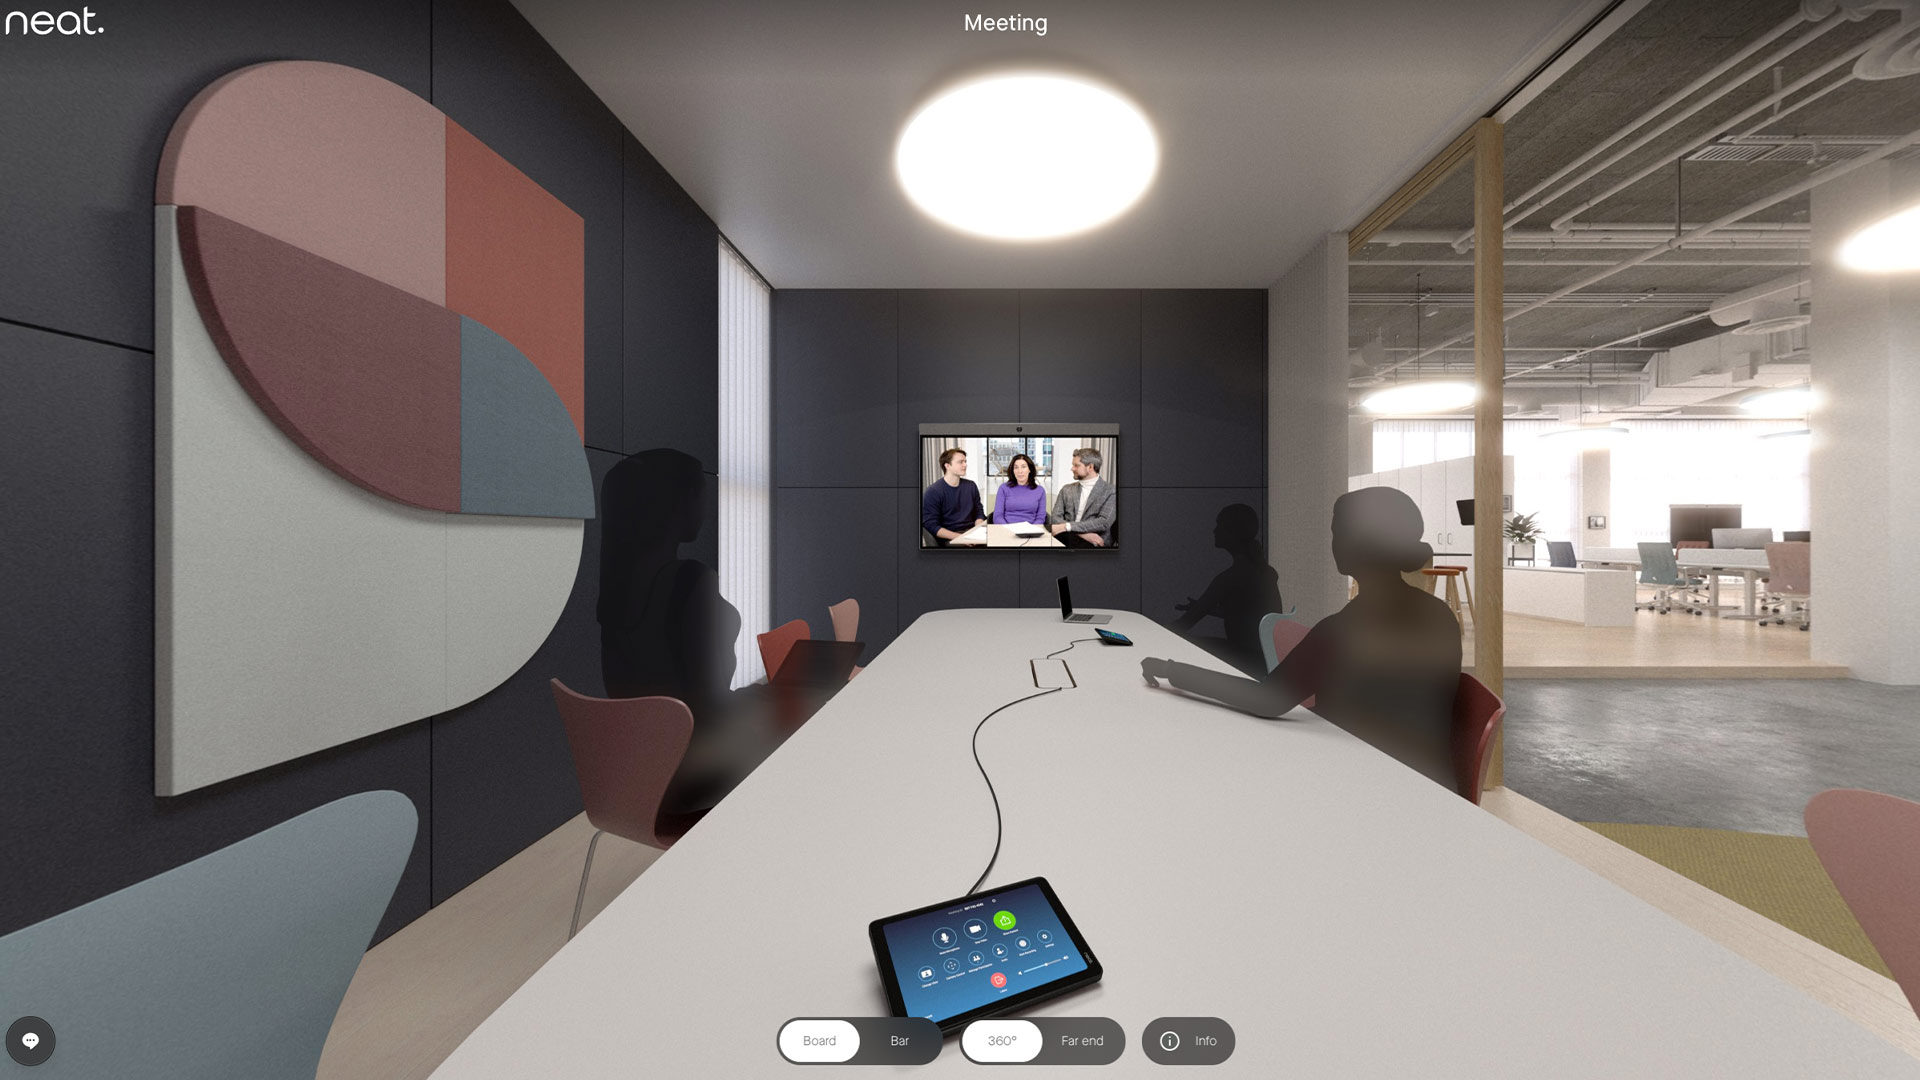 Neat Video Conferencing